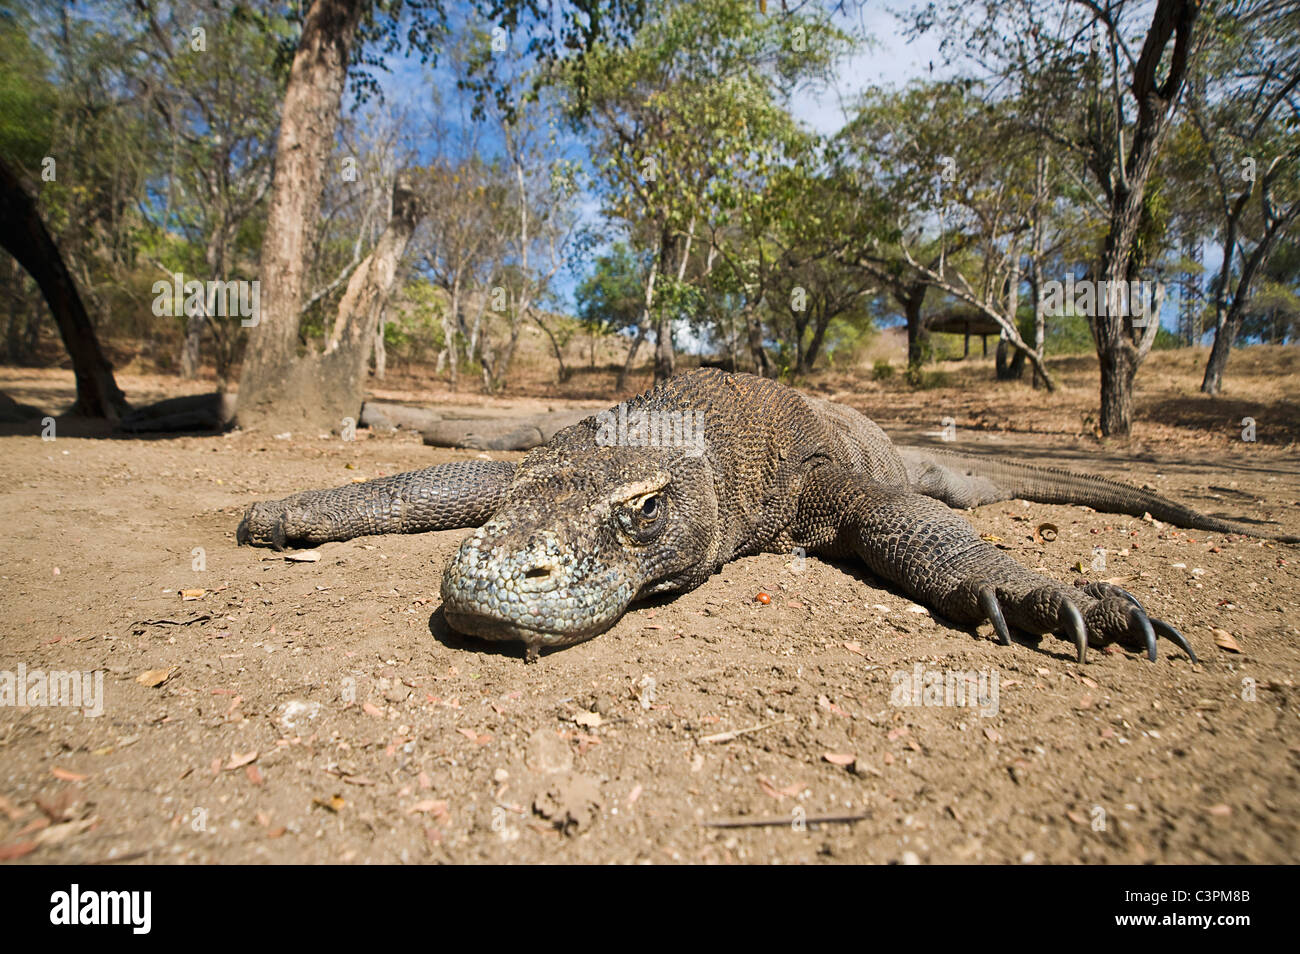 Komodo dragon in forest, close-up Stock Photo